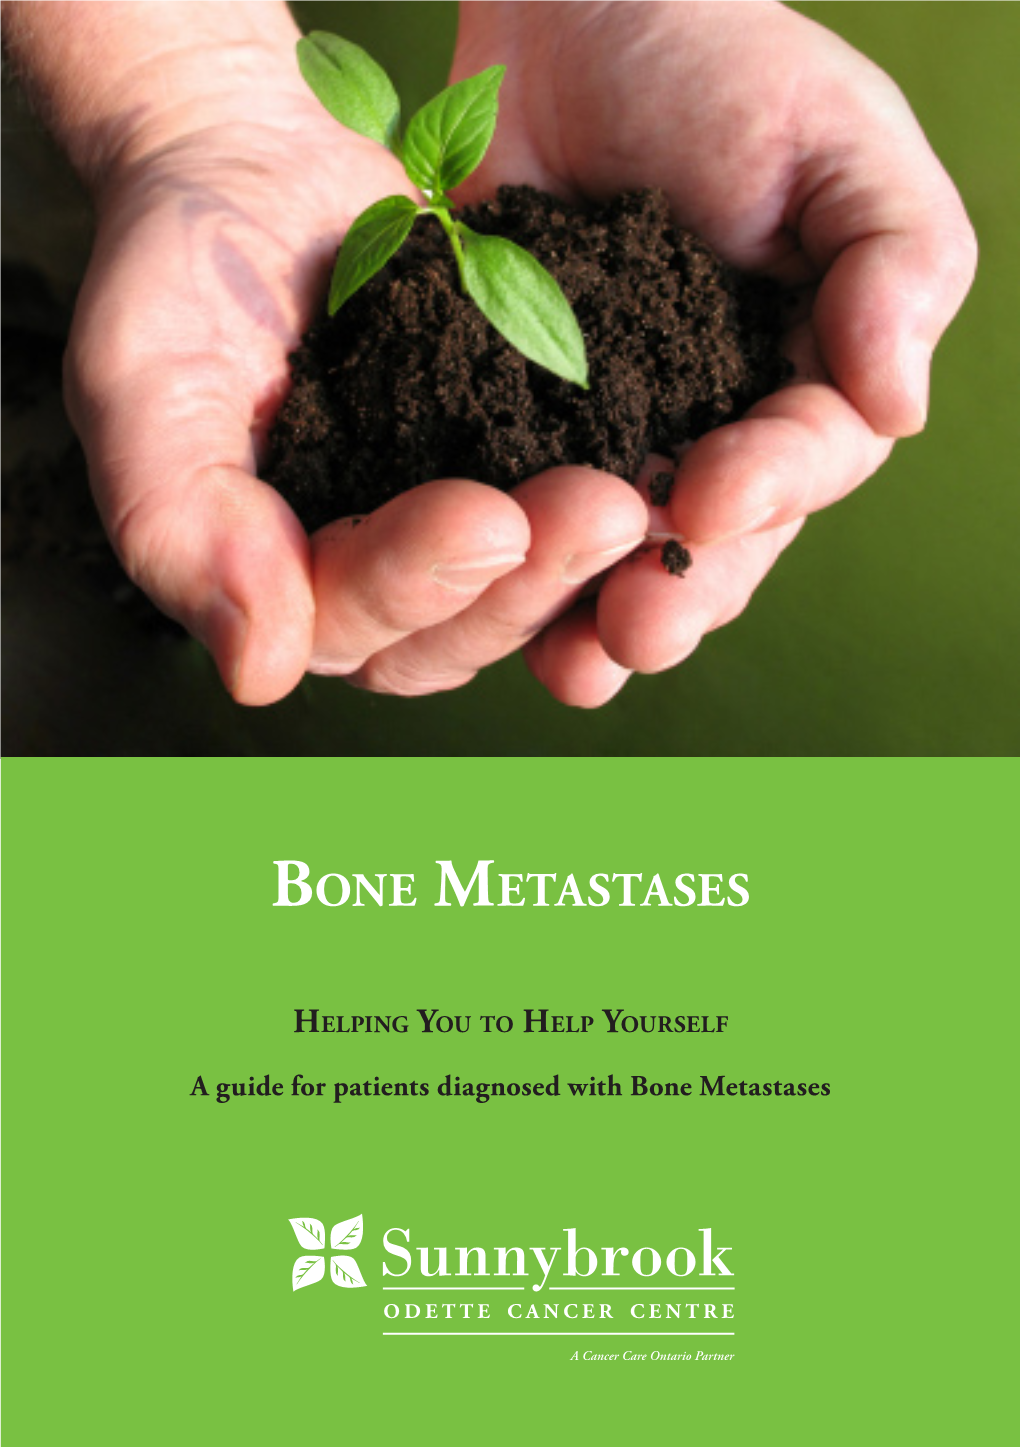 Bone Metastases This Book Was Written and Produced by Odette Cancer Centre at Sunnybrook Health Sciences Centre